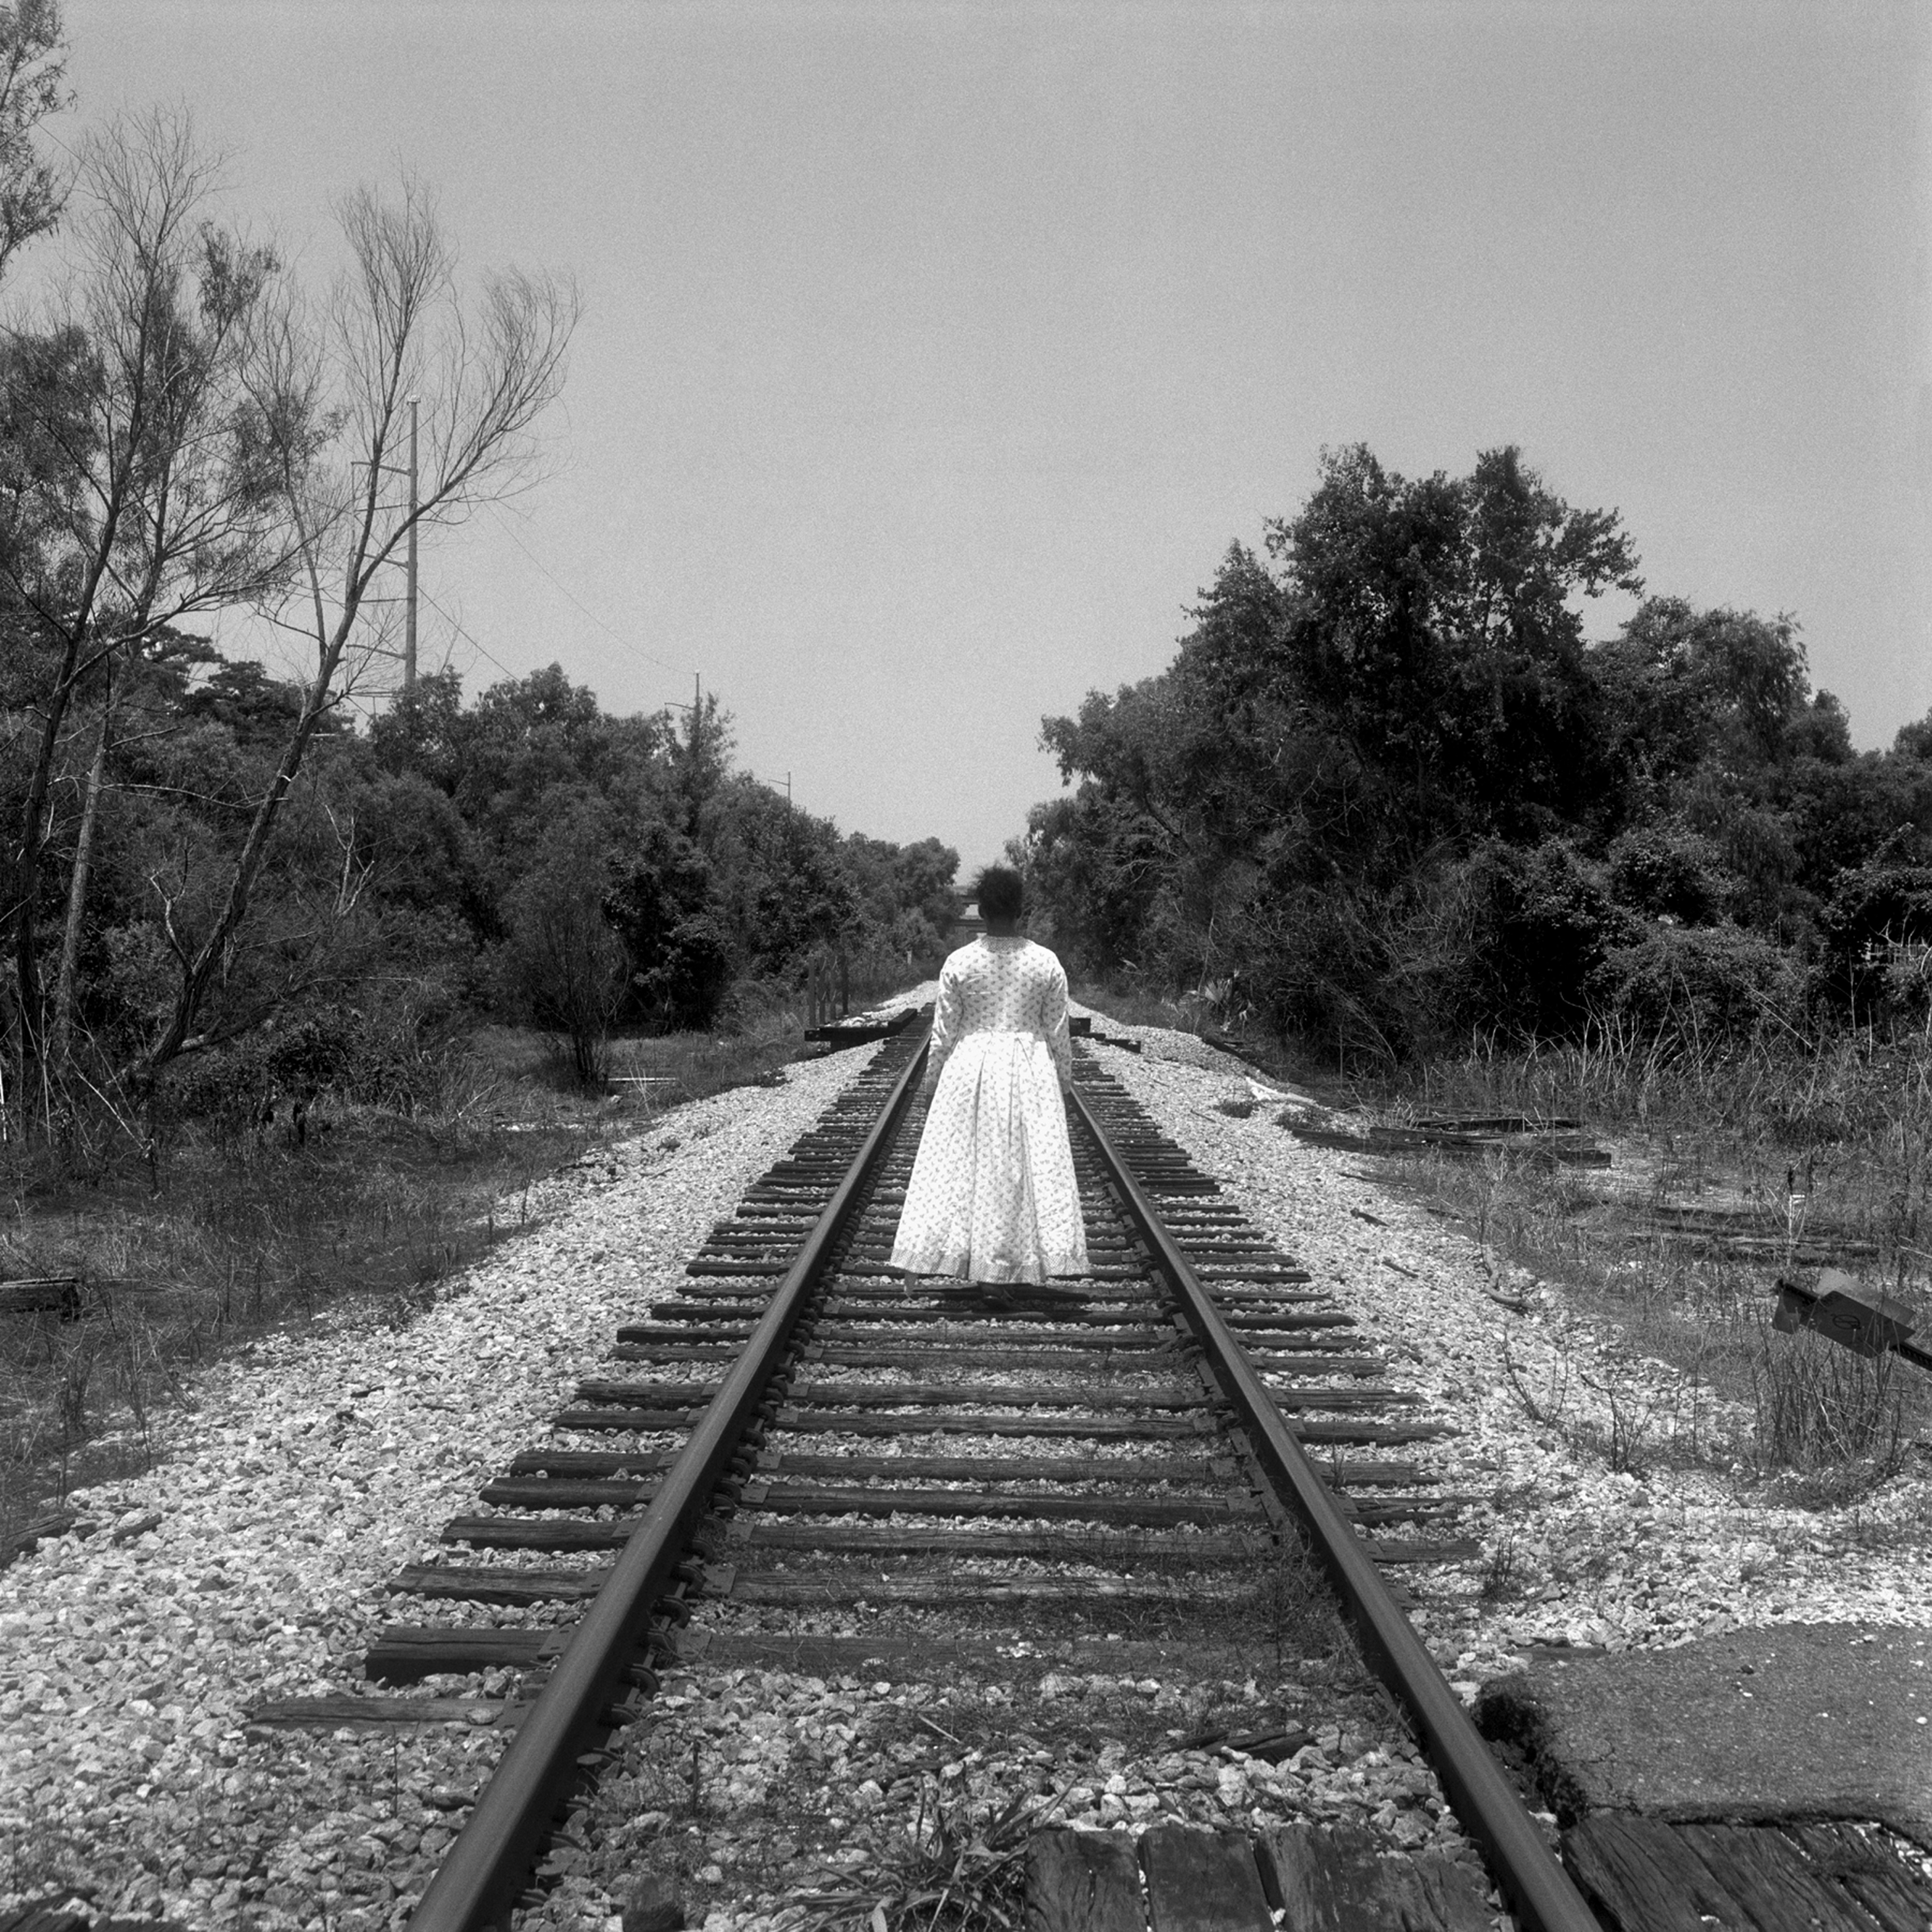 Galerie Barbara Thumm \ Carrie Mae Weems, María Magdalena Campos-Pons – Black Matters group exhibition \ Untitled (Woman walking along railroad tracks) (2003)